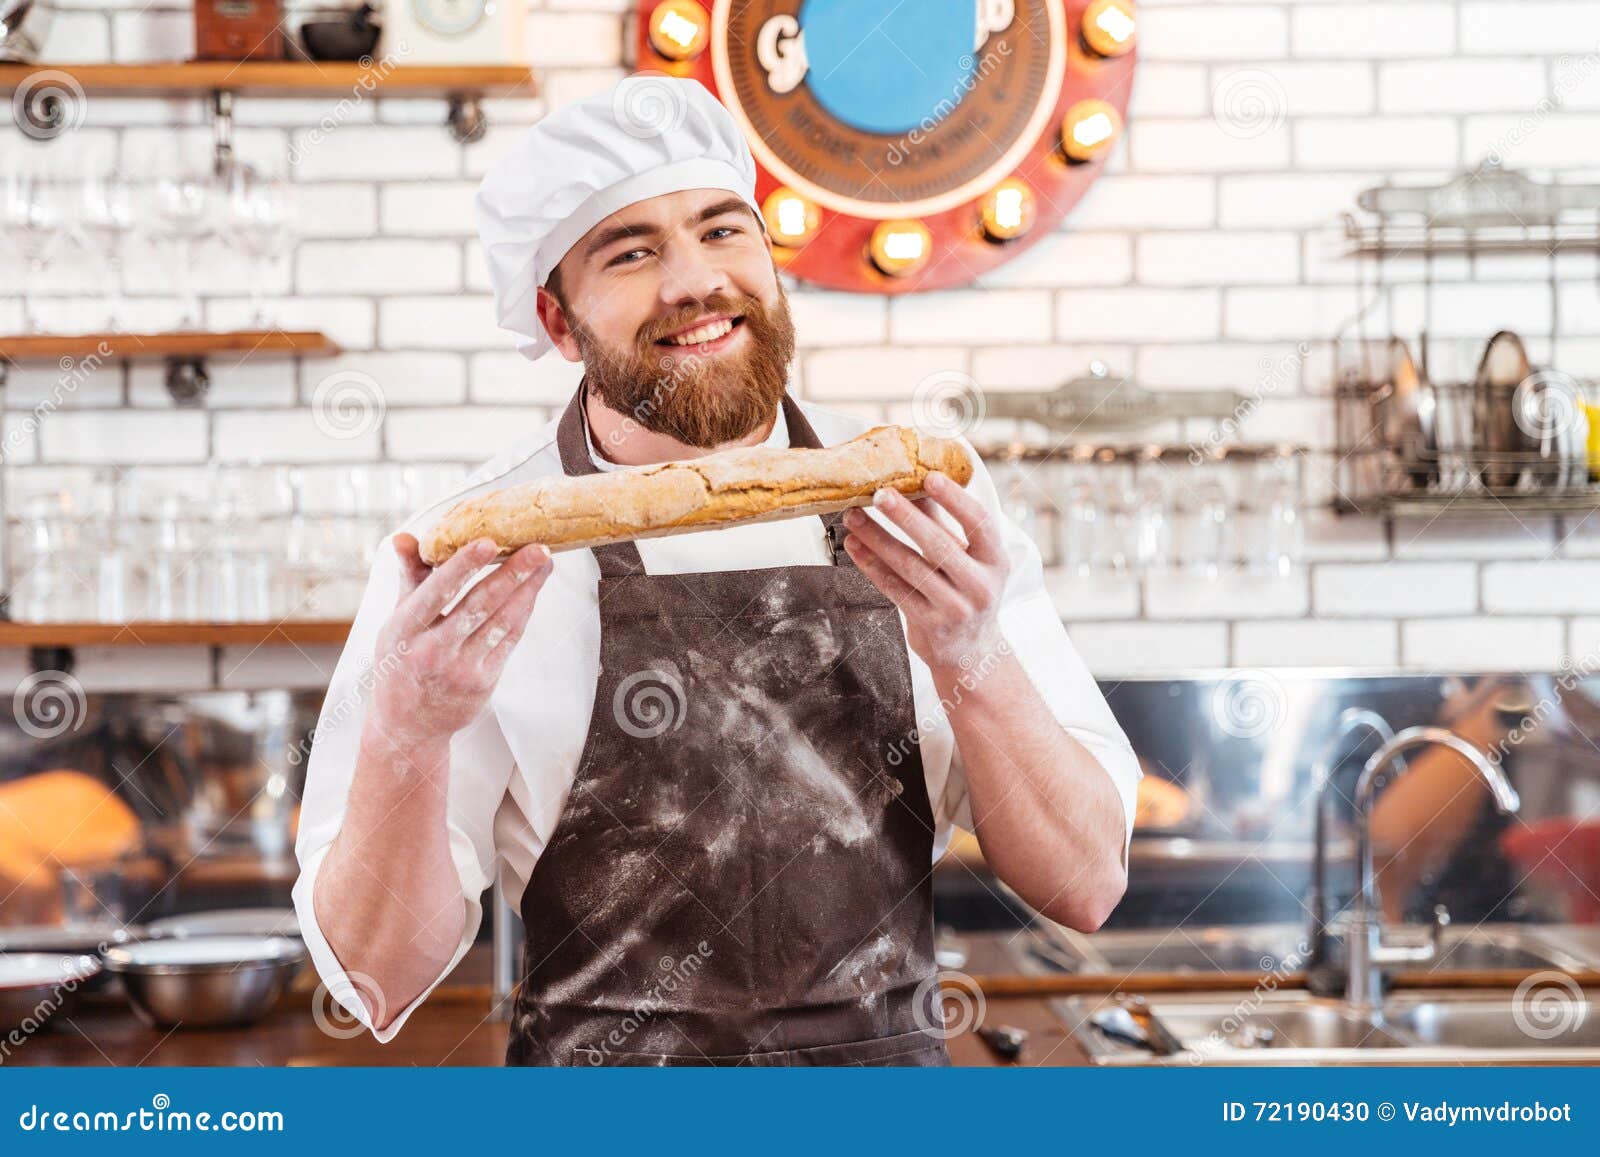 Cheerful young man baker standing at bakery holding bread Stock Photo by  vadymvdrobot